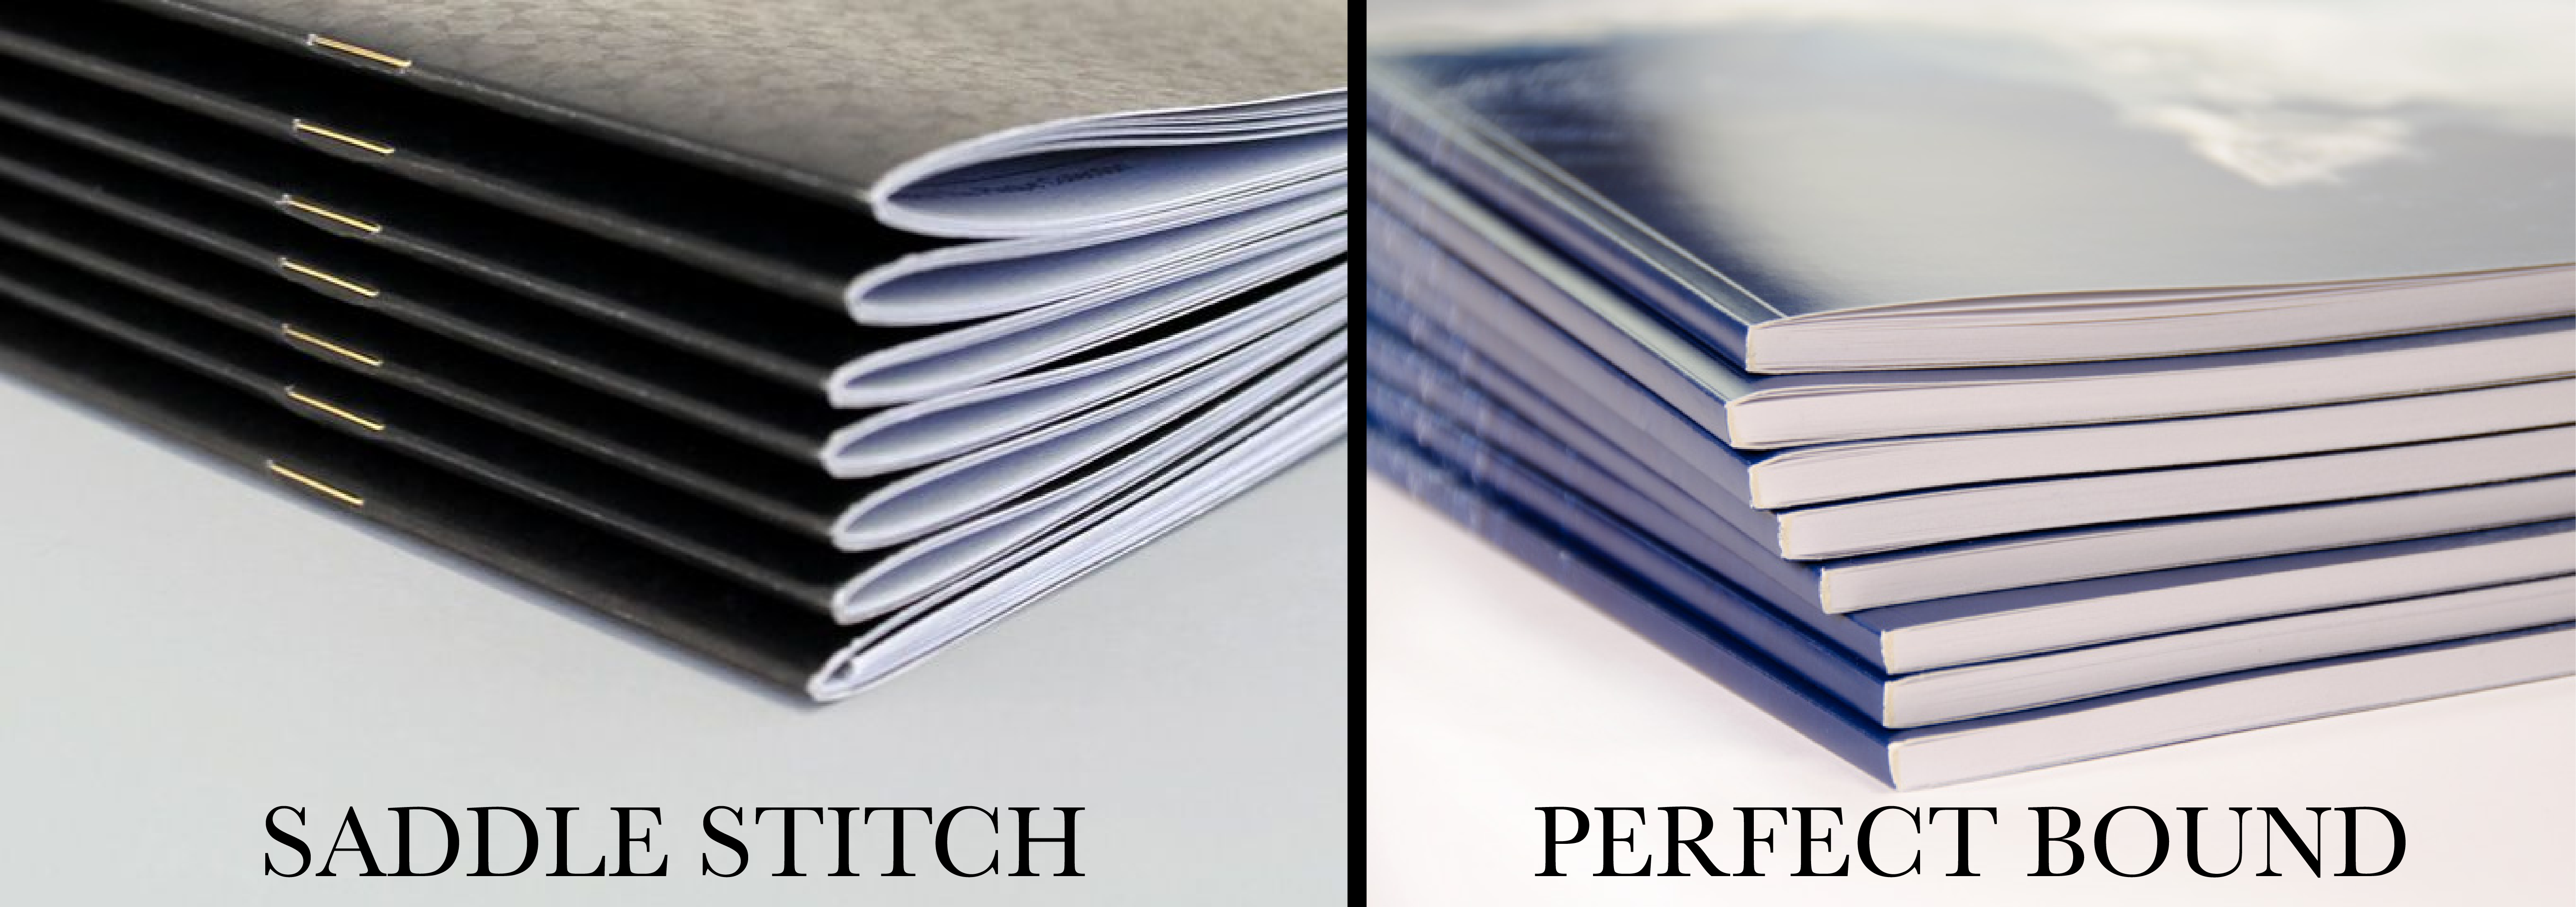 Saddle Stitch Versus Perfect Bound, Which One is Better For You?